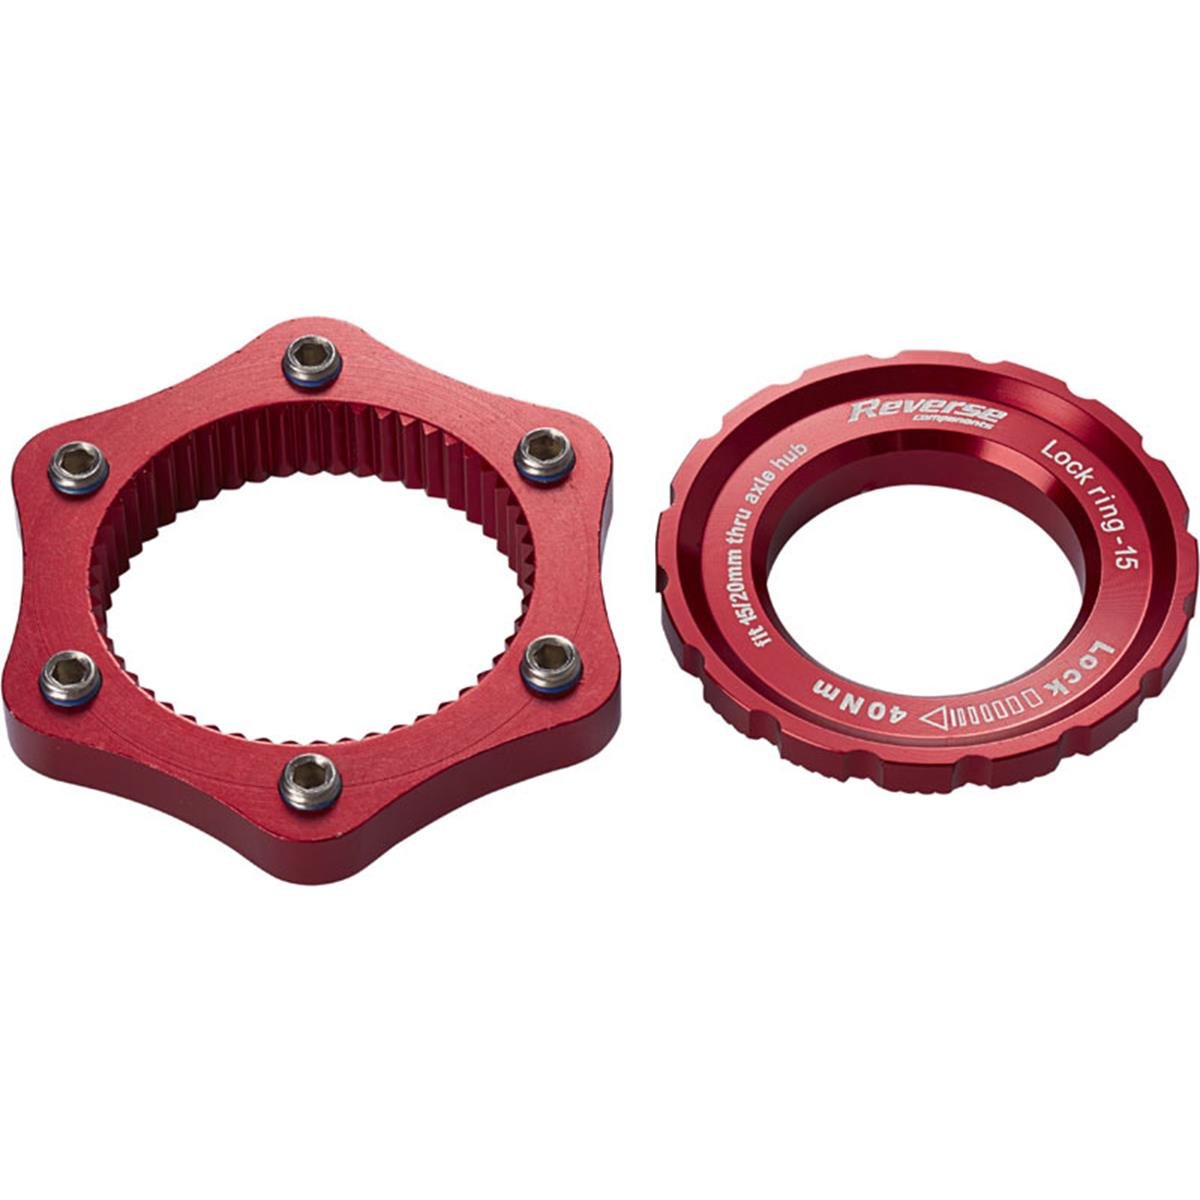 Reverse Components Center Lock Adapter  Red